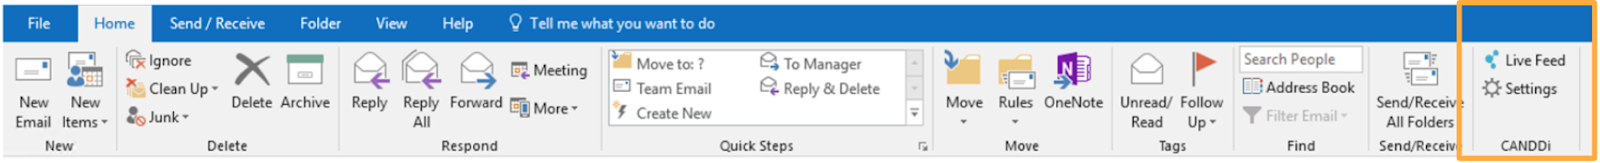 Outlook header example